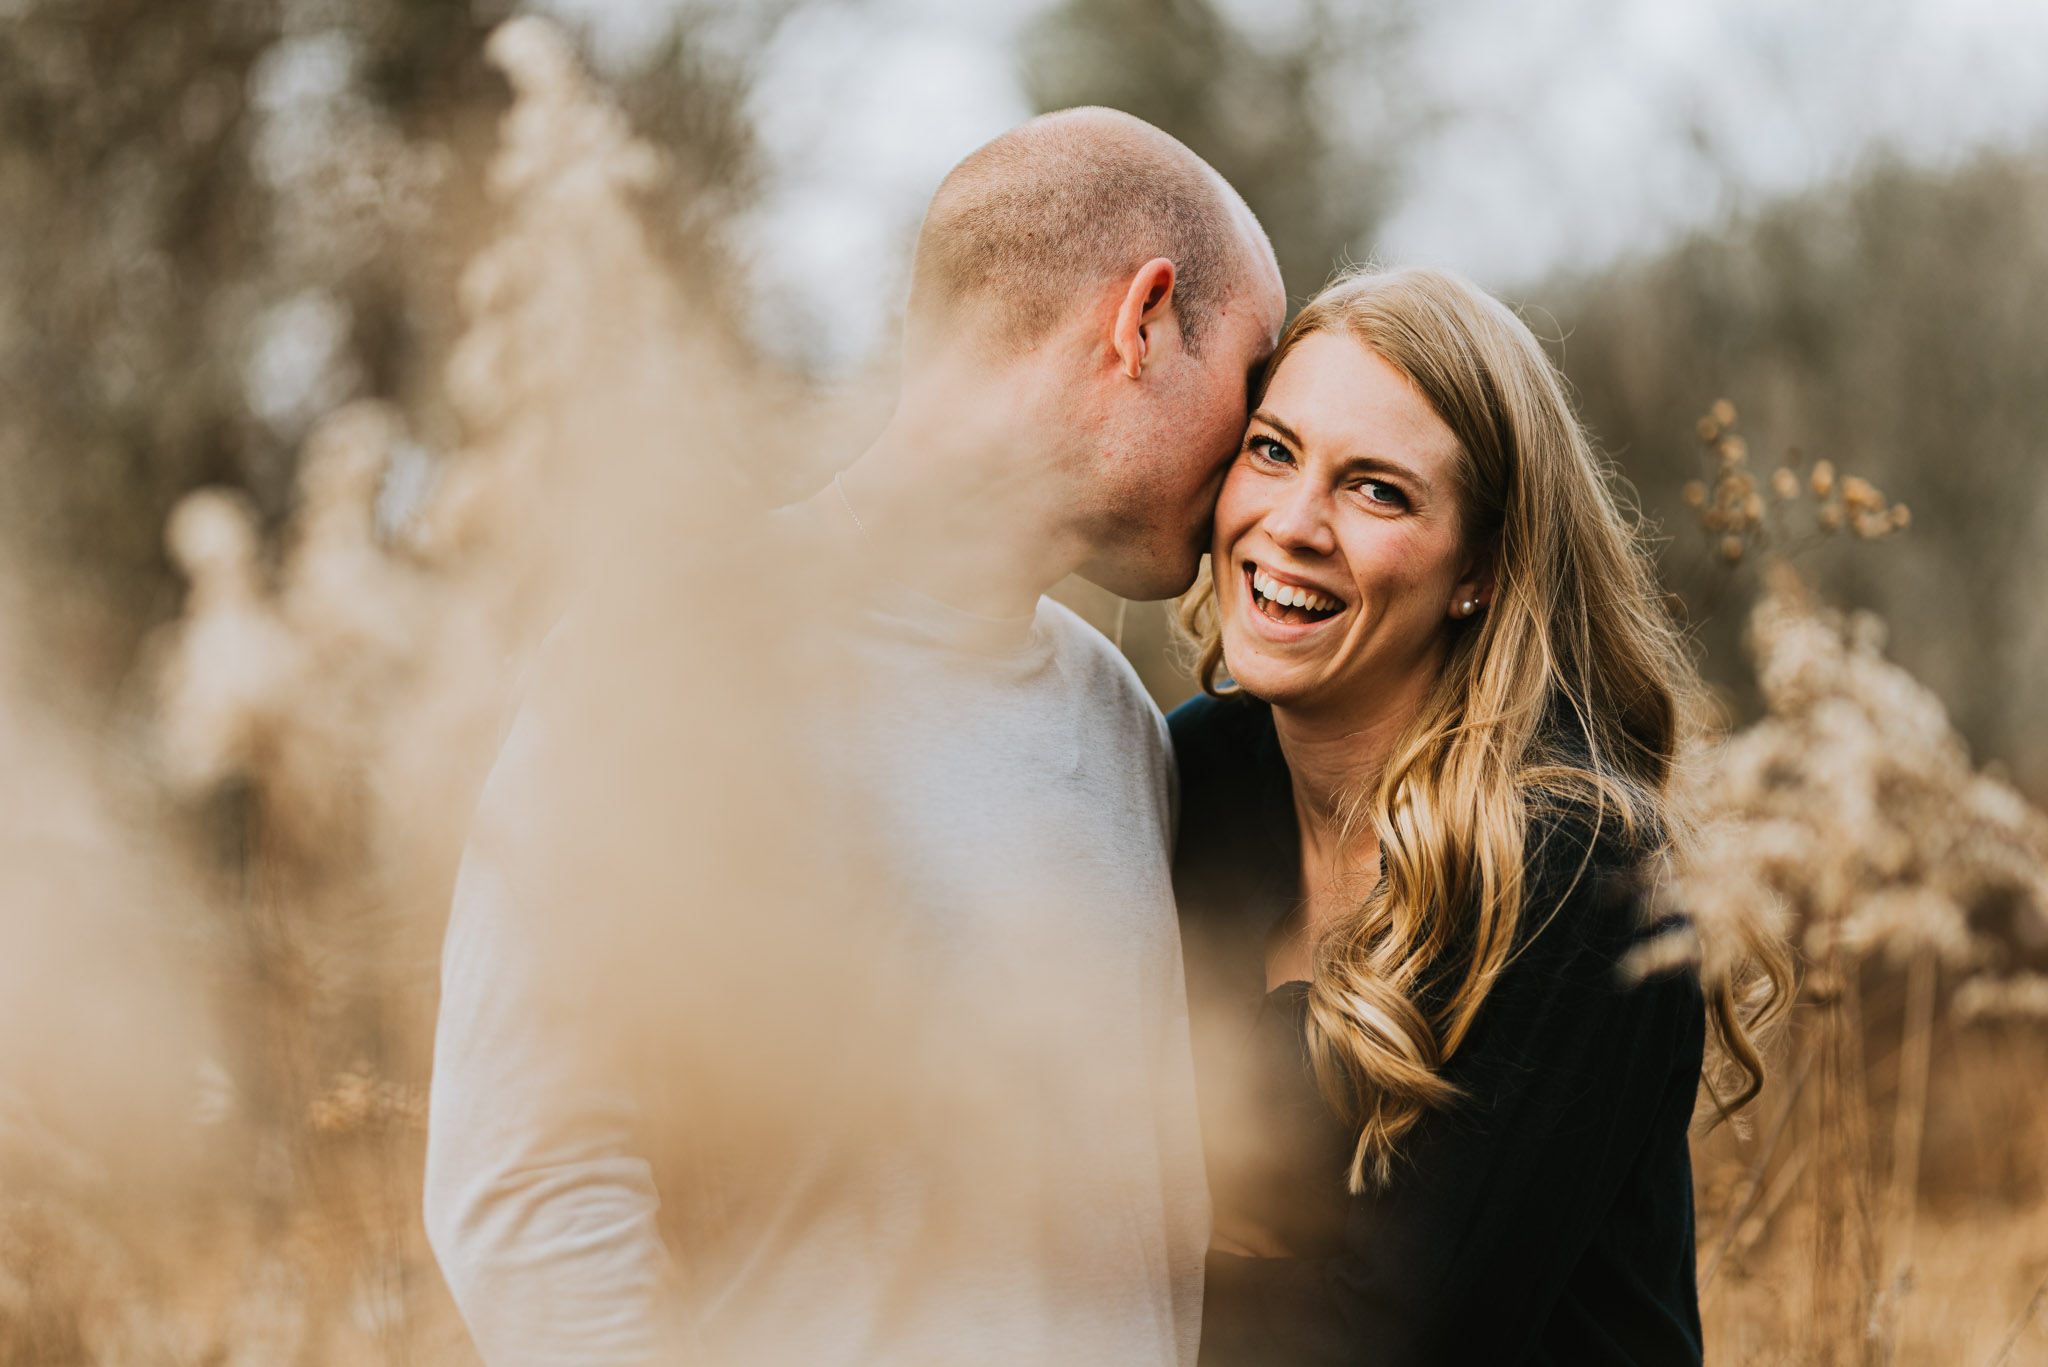 blowing rock field engagement photo